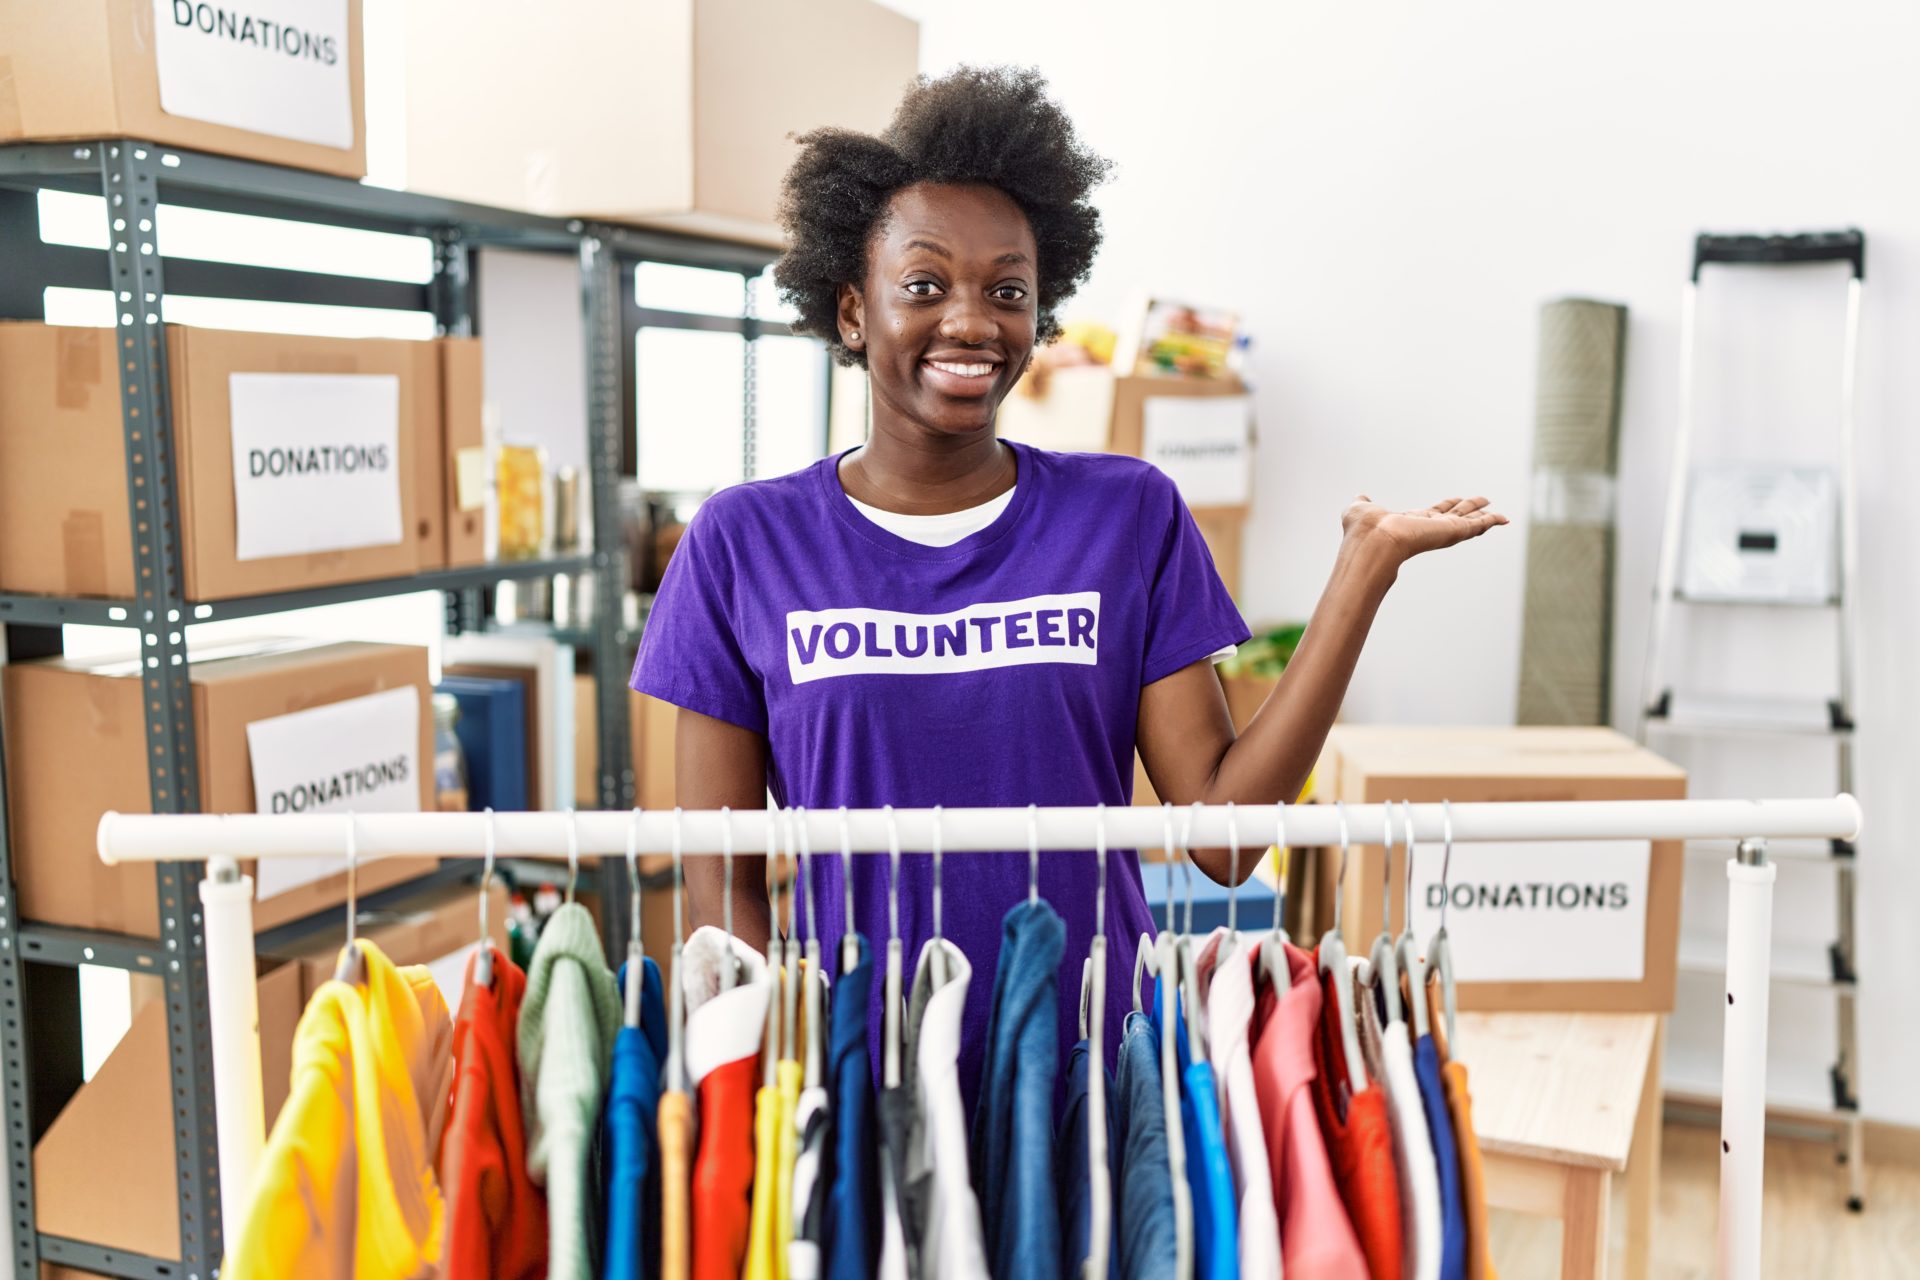 African,Young,Woman,Wearing,Volunteer,T,Shirt,At,Donations,Stand